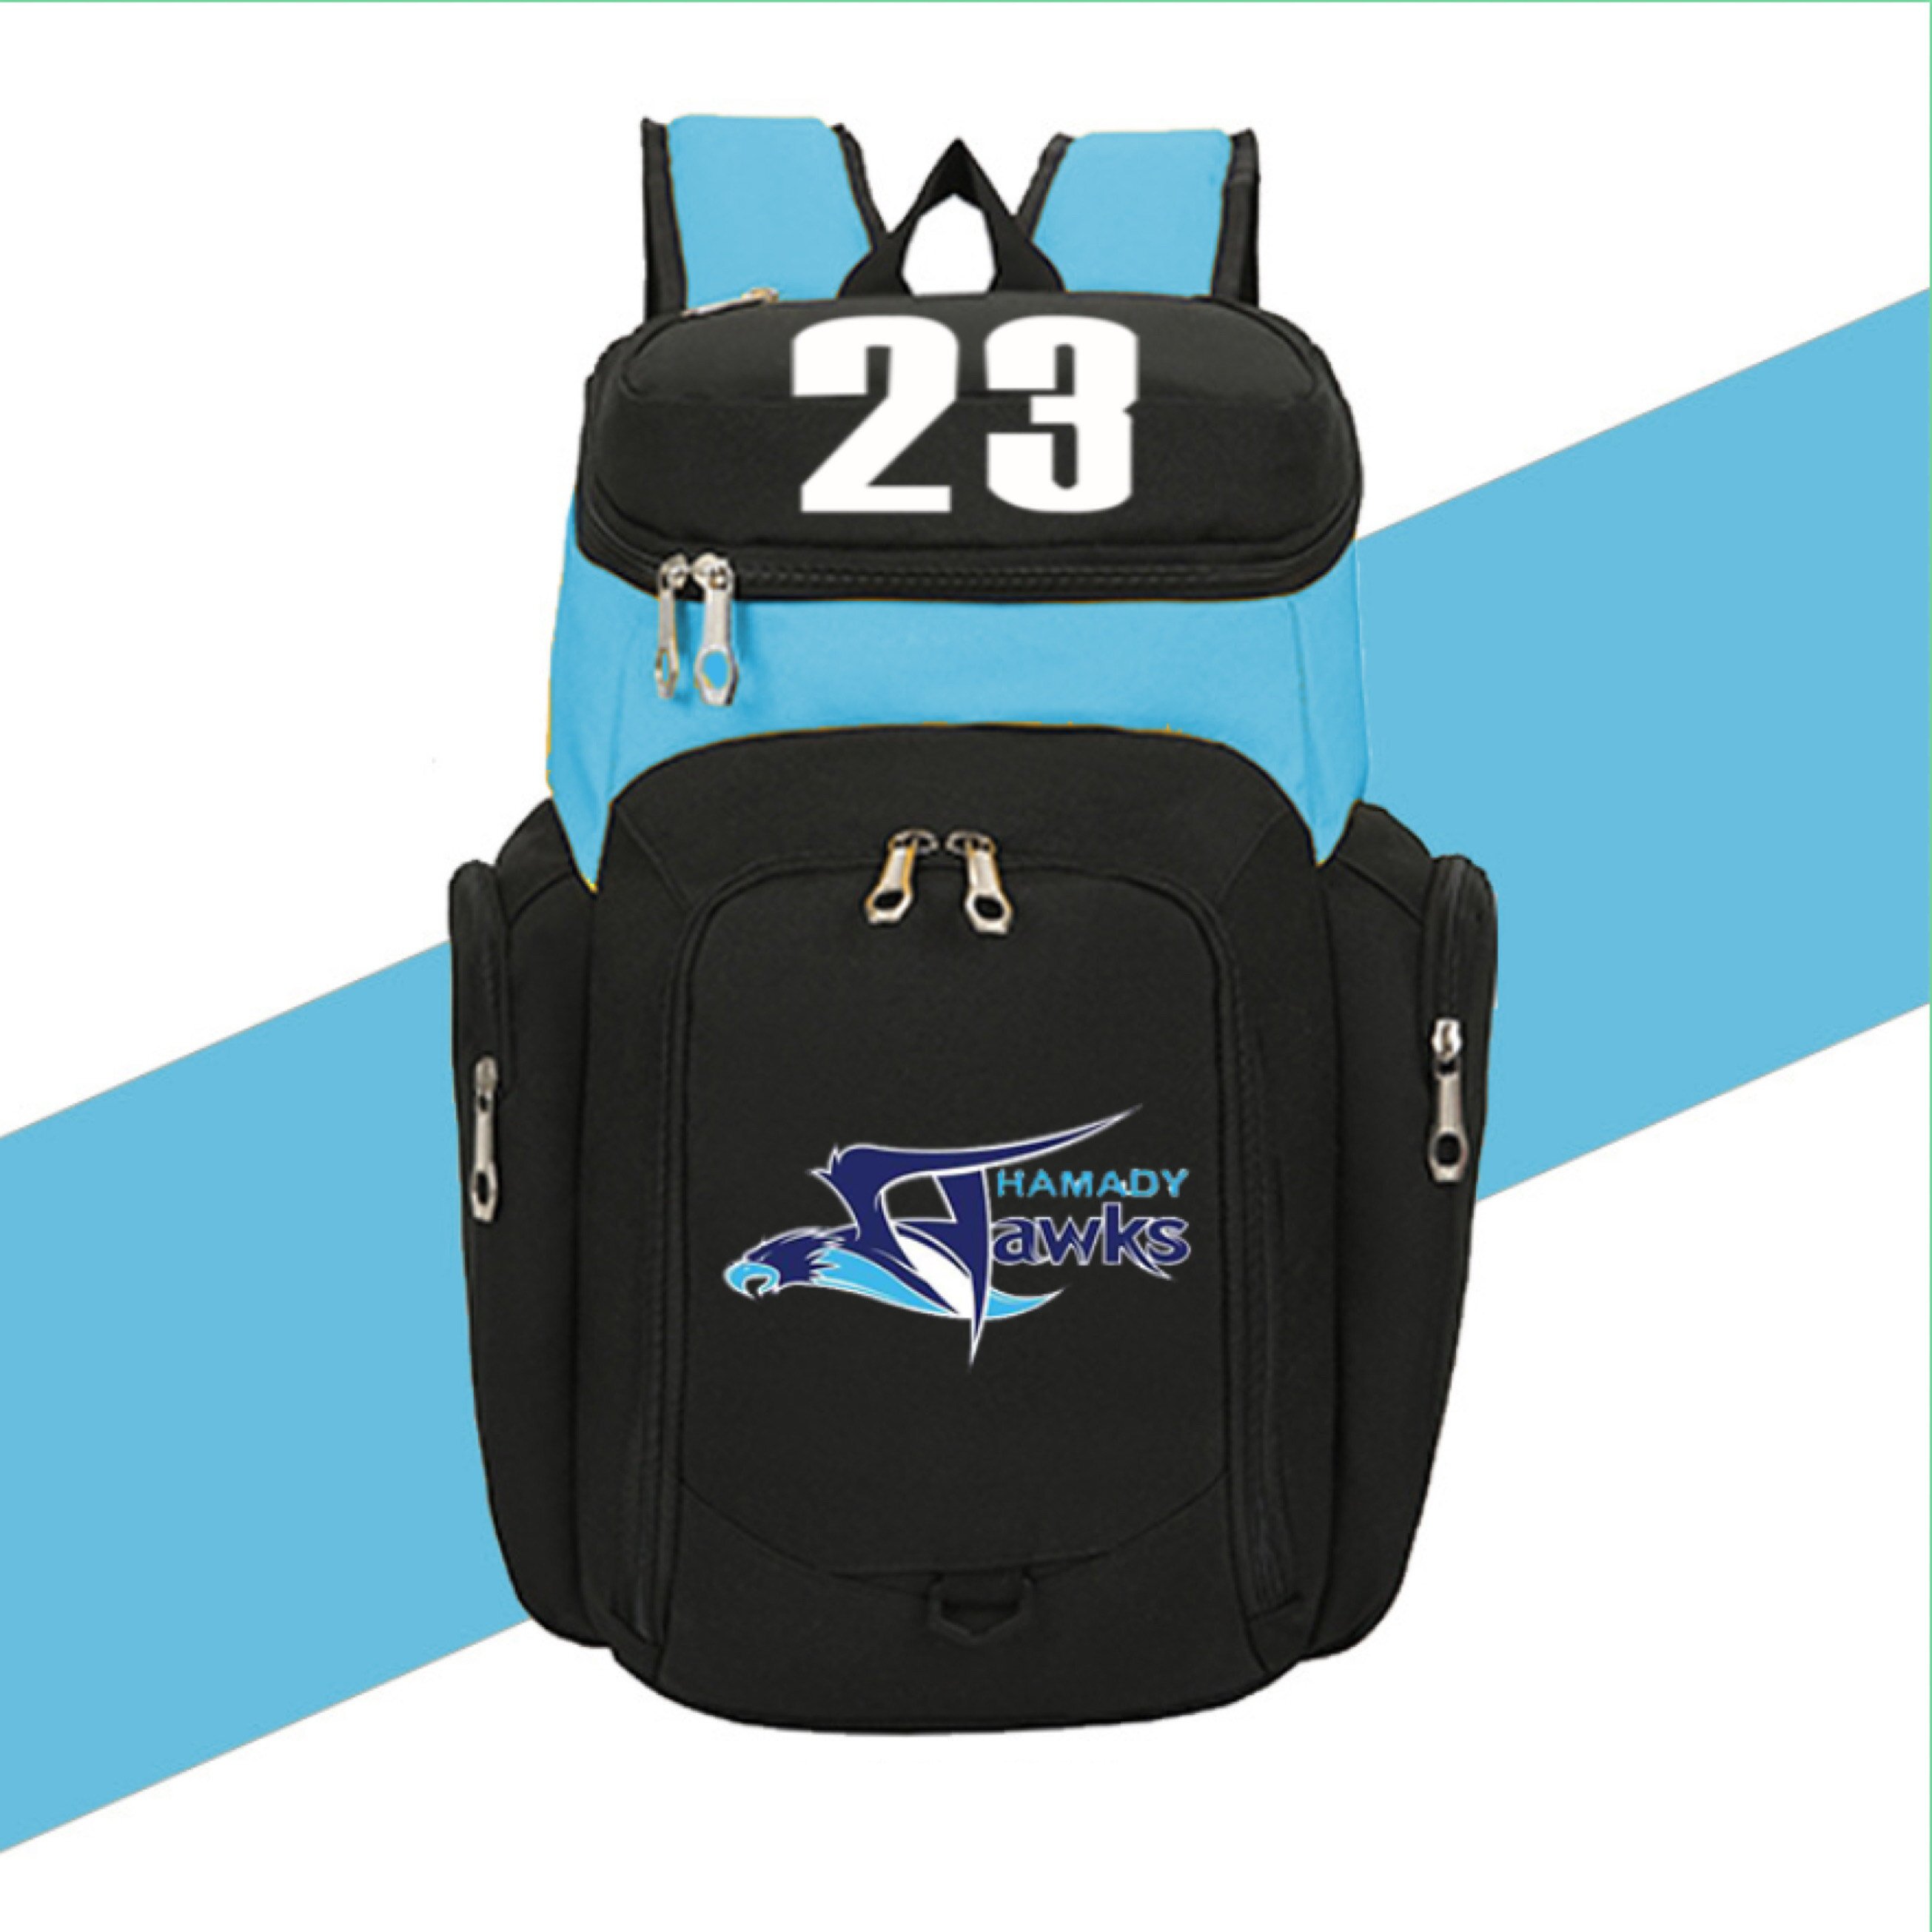 In addition to the uniforms, each player on the team will also receive a warm-up jumpsuit and custom backpack. 